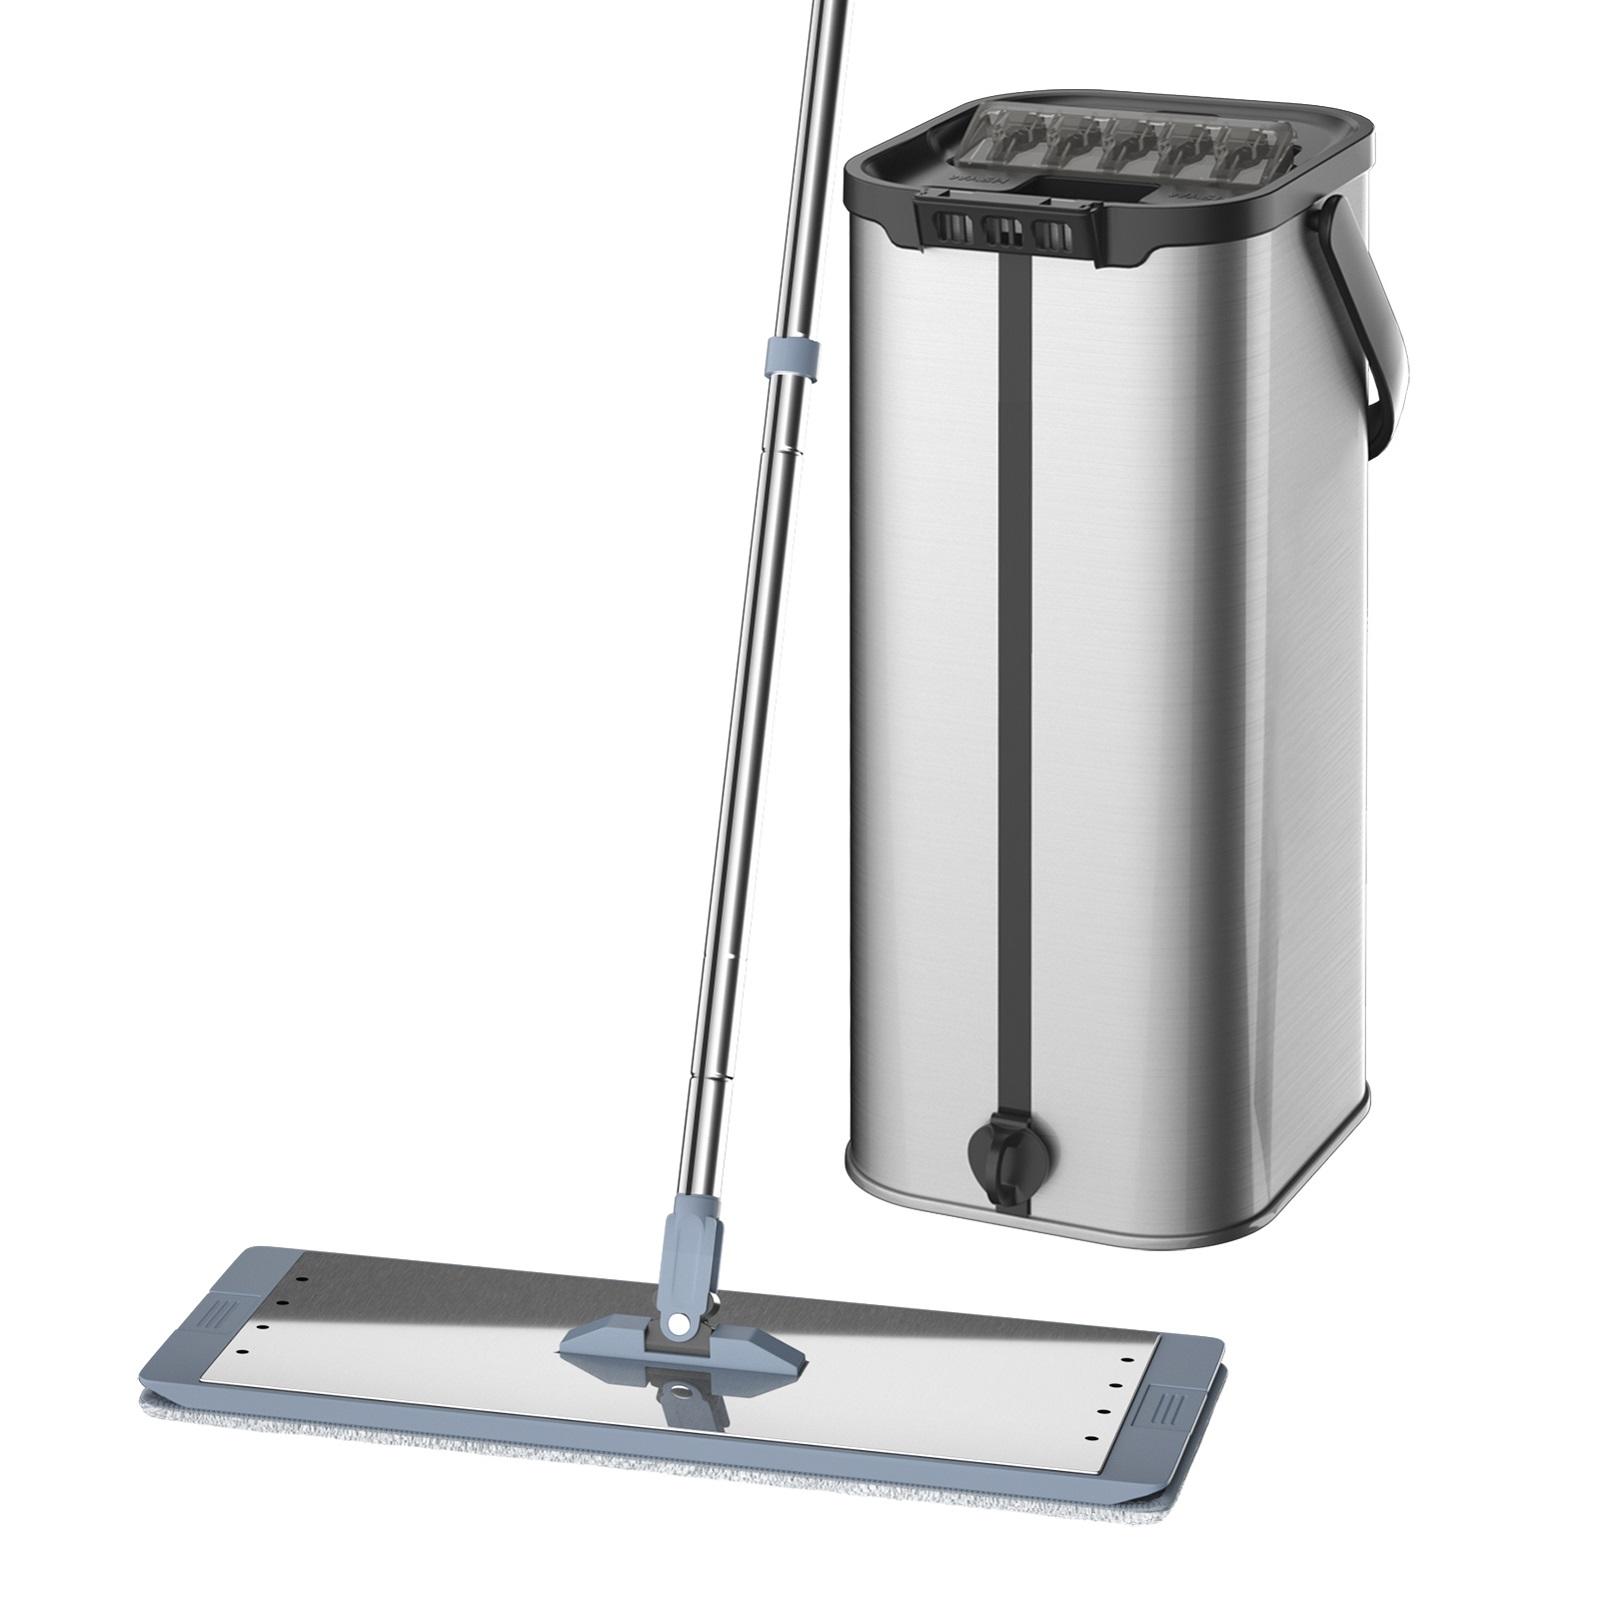 X1 Self-washed Double Drive Magic stainless steel flat mop bucket set